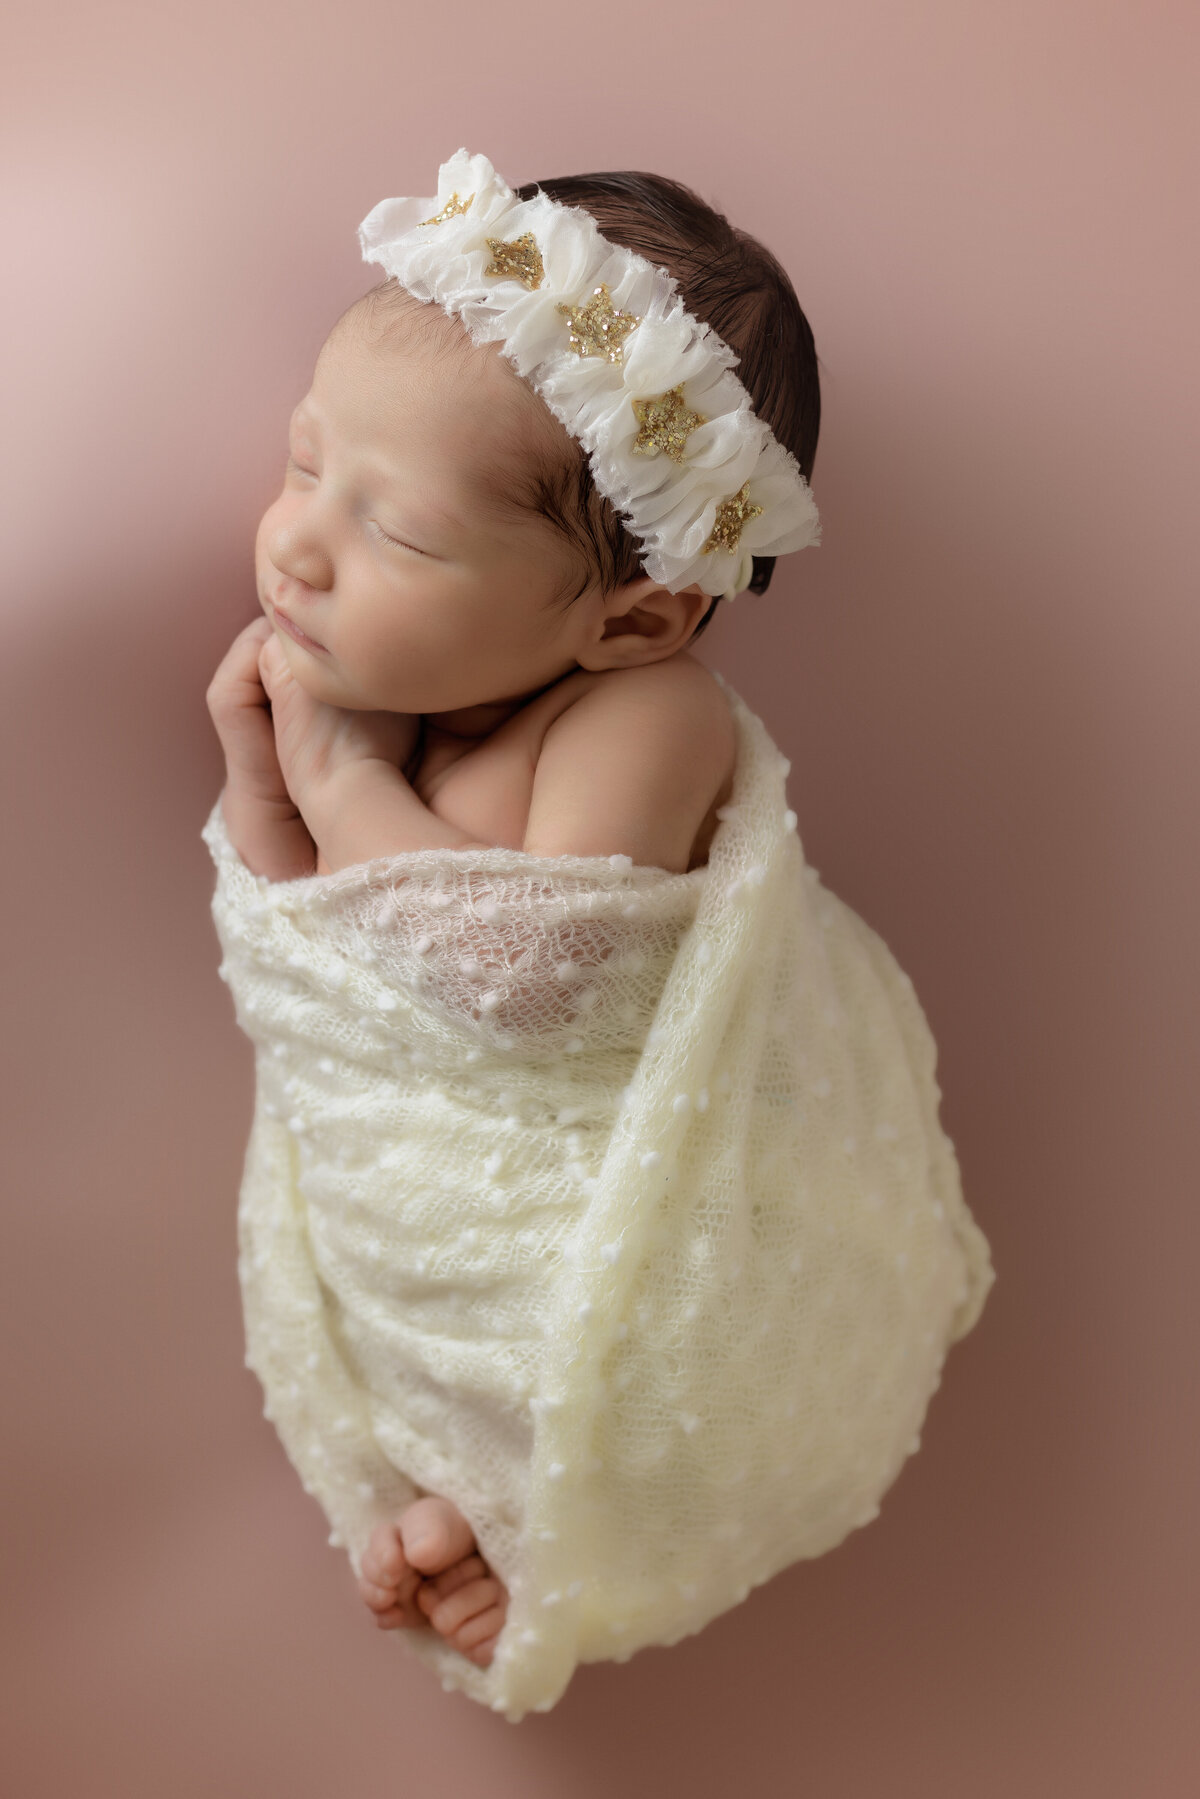 Newborn Photographer, a baby is swaddles in a thin ornate blanket with a matching headband